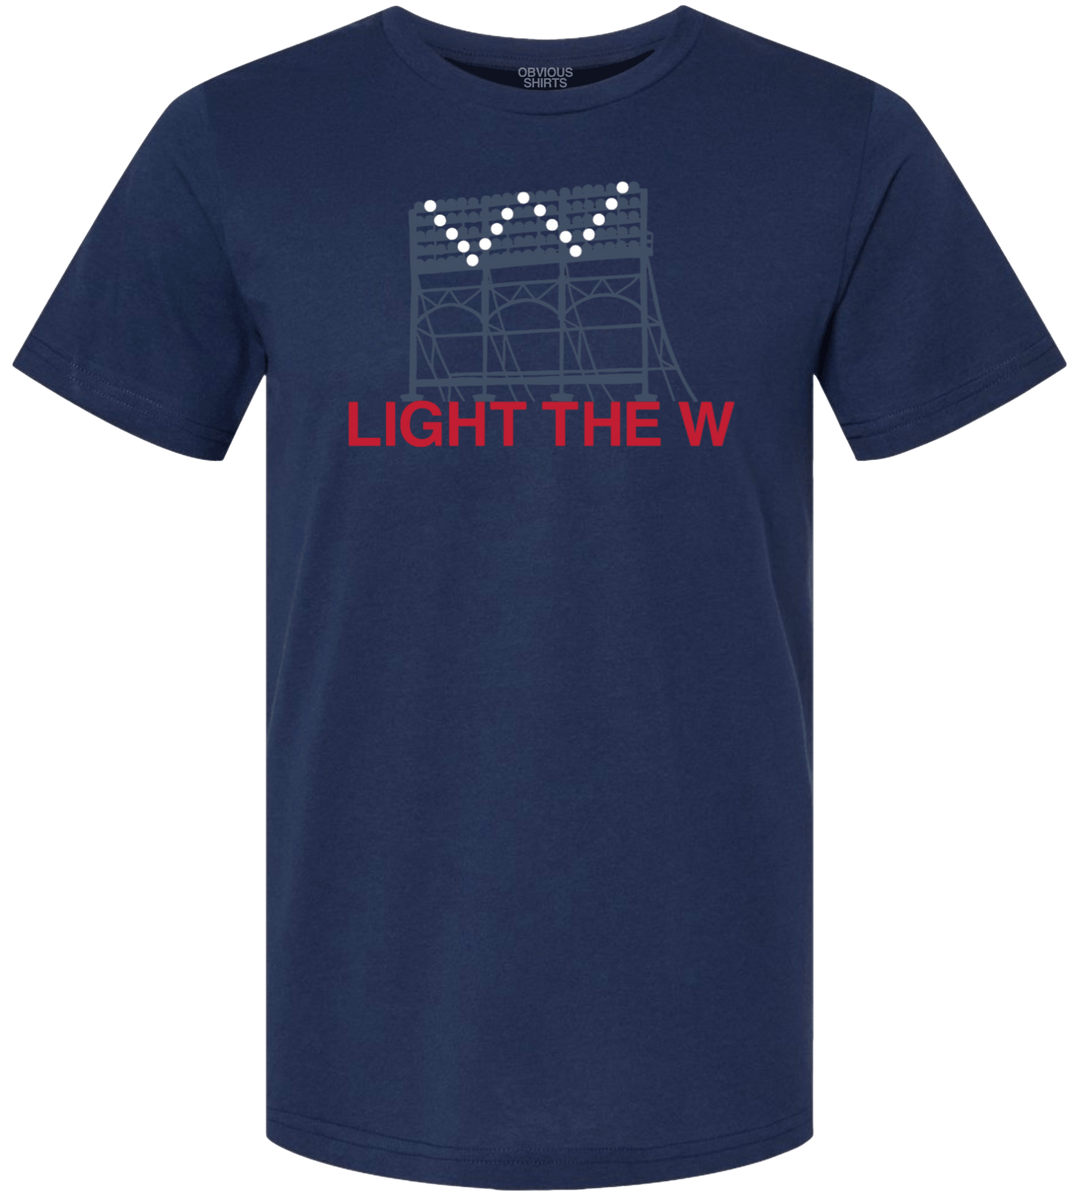 LIGHT THE W. - OBVIOUS SHIRTS